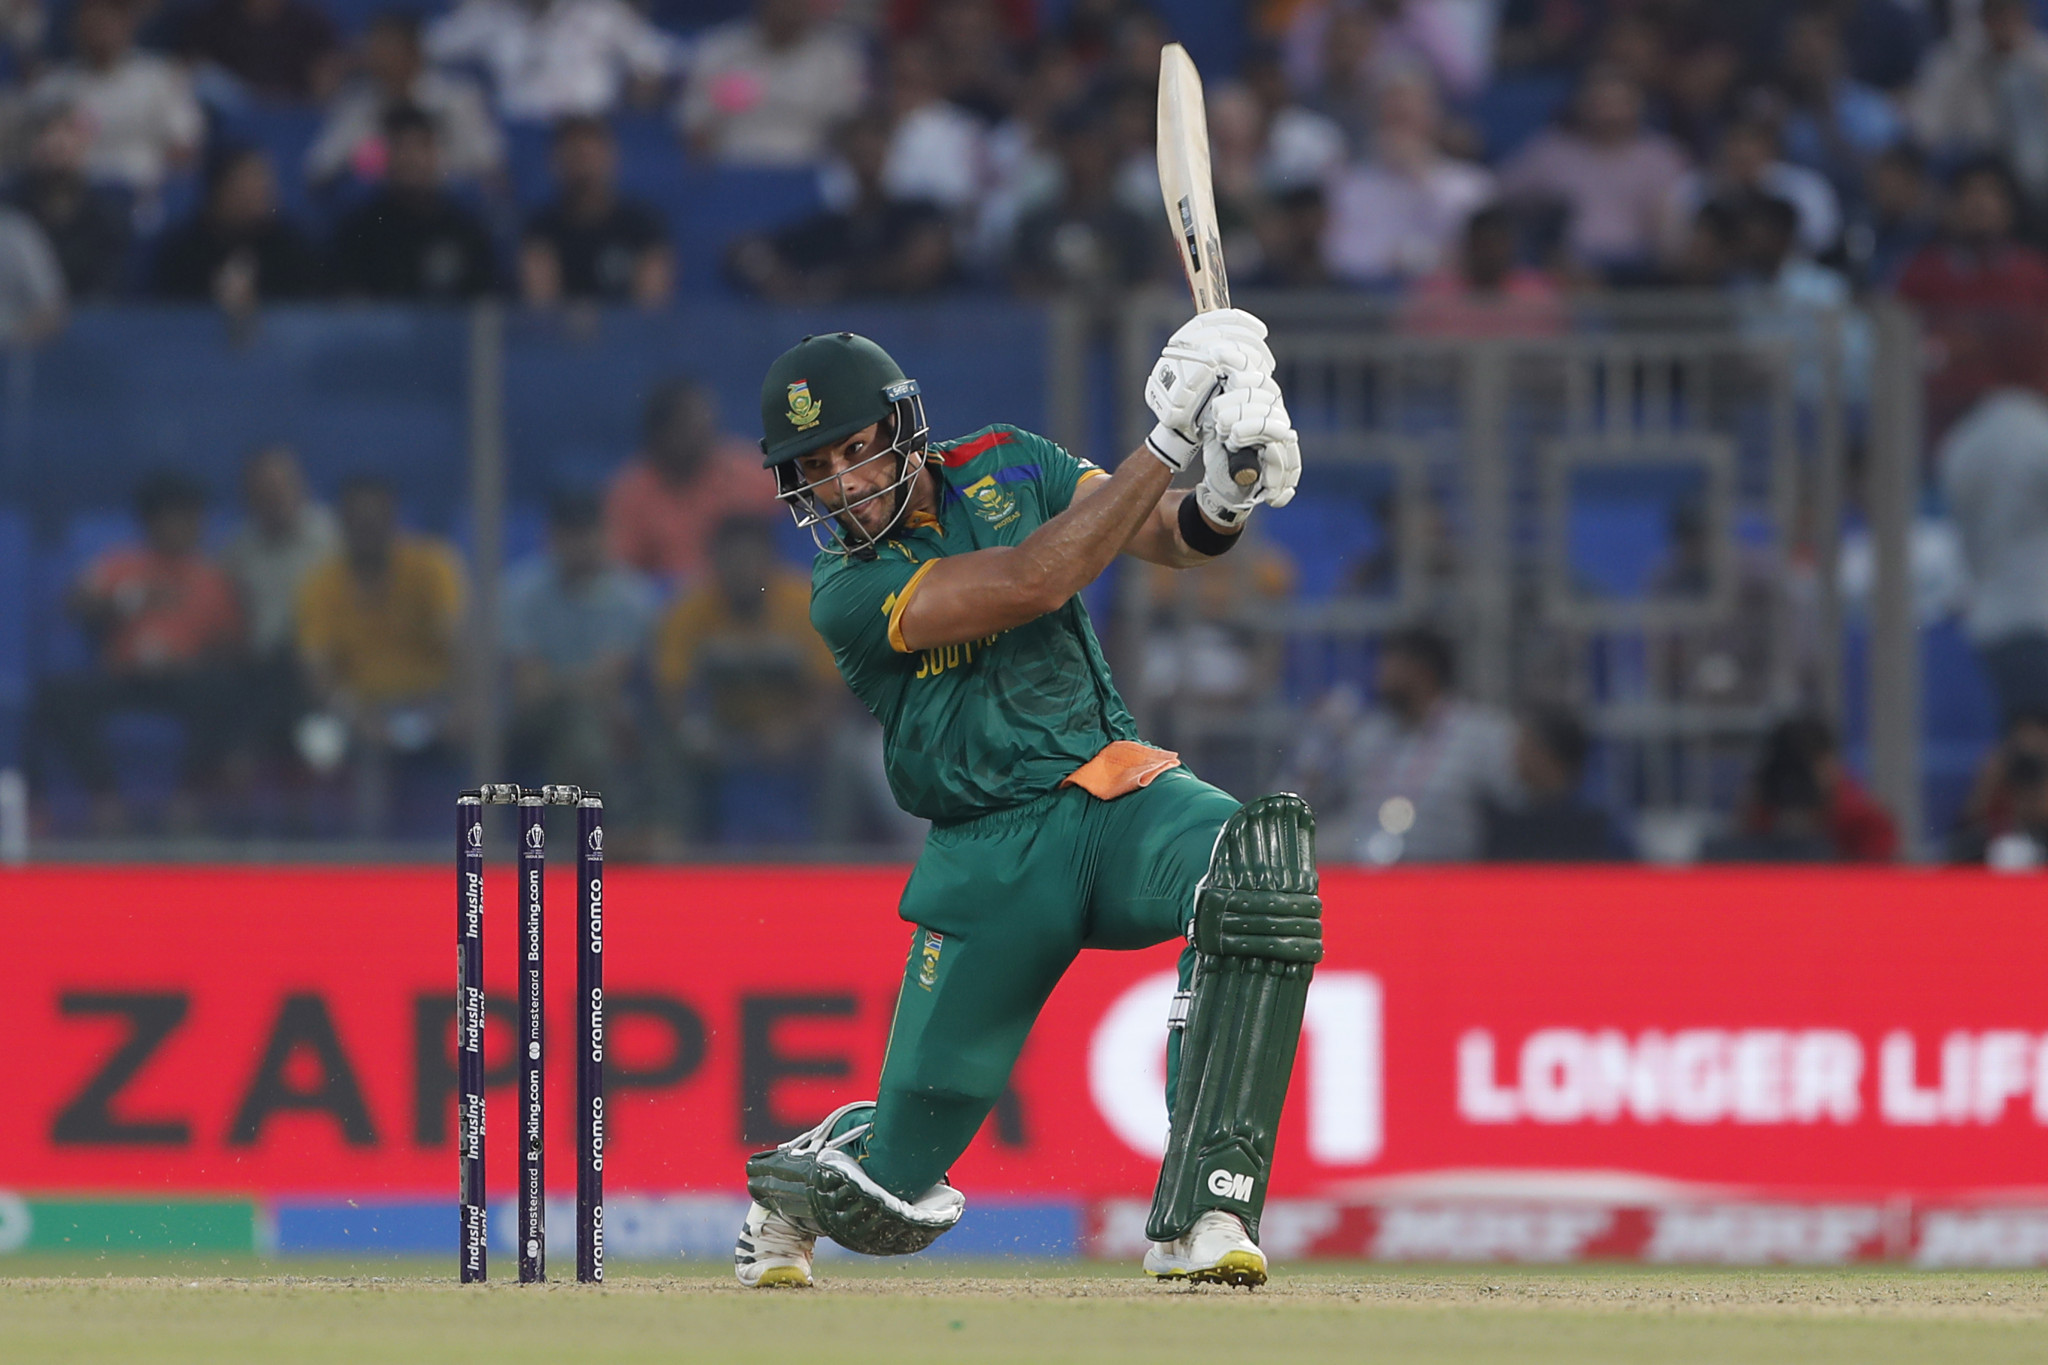 Records tumble as South Africa claim big opening win at Cricket World Cup